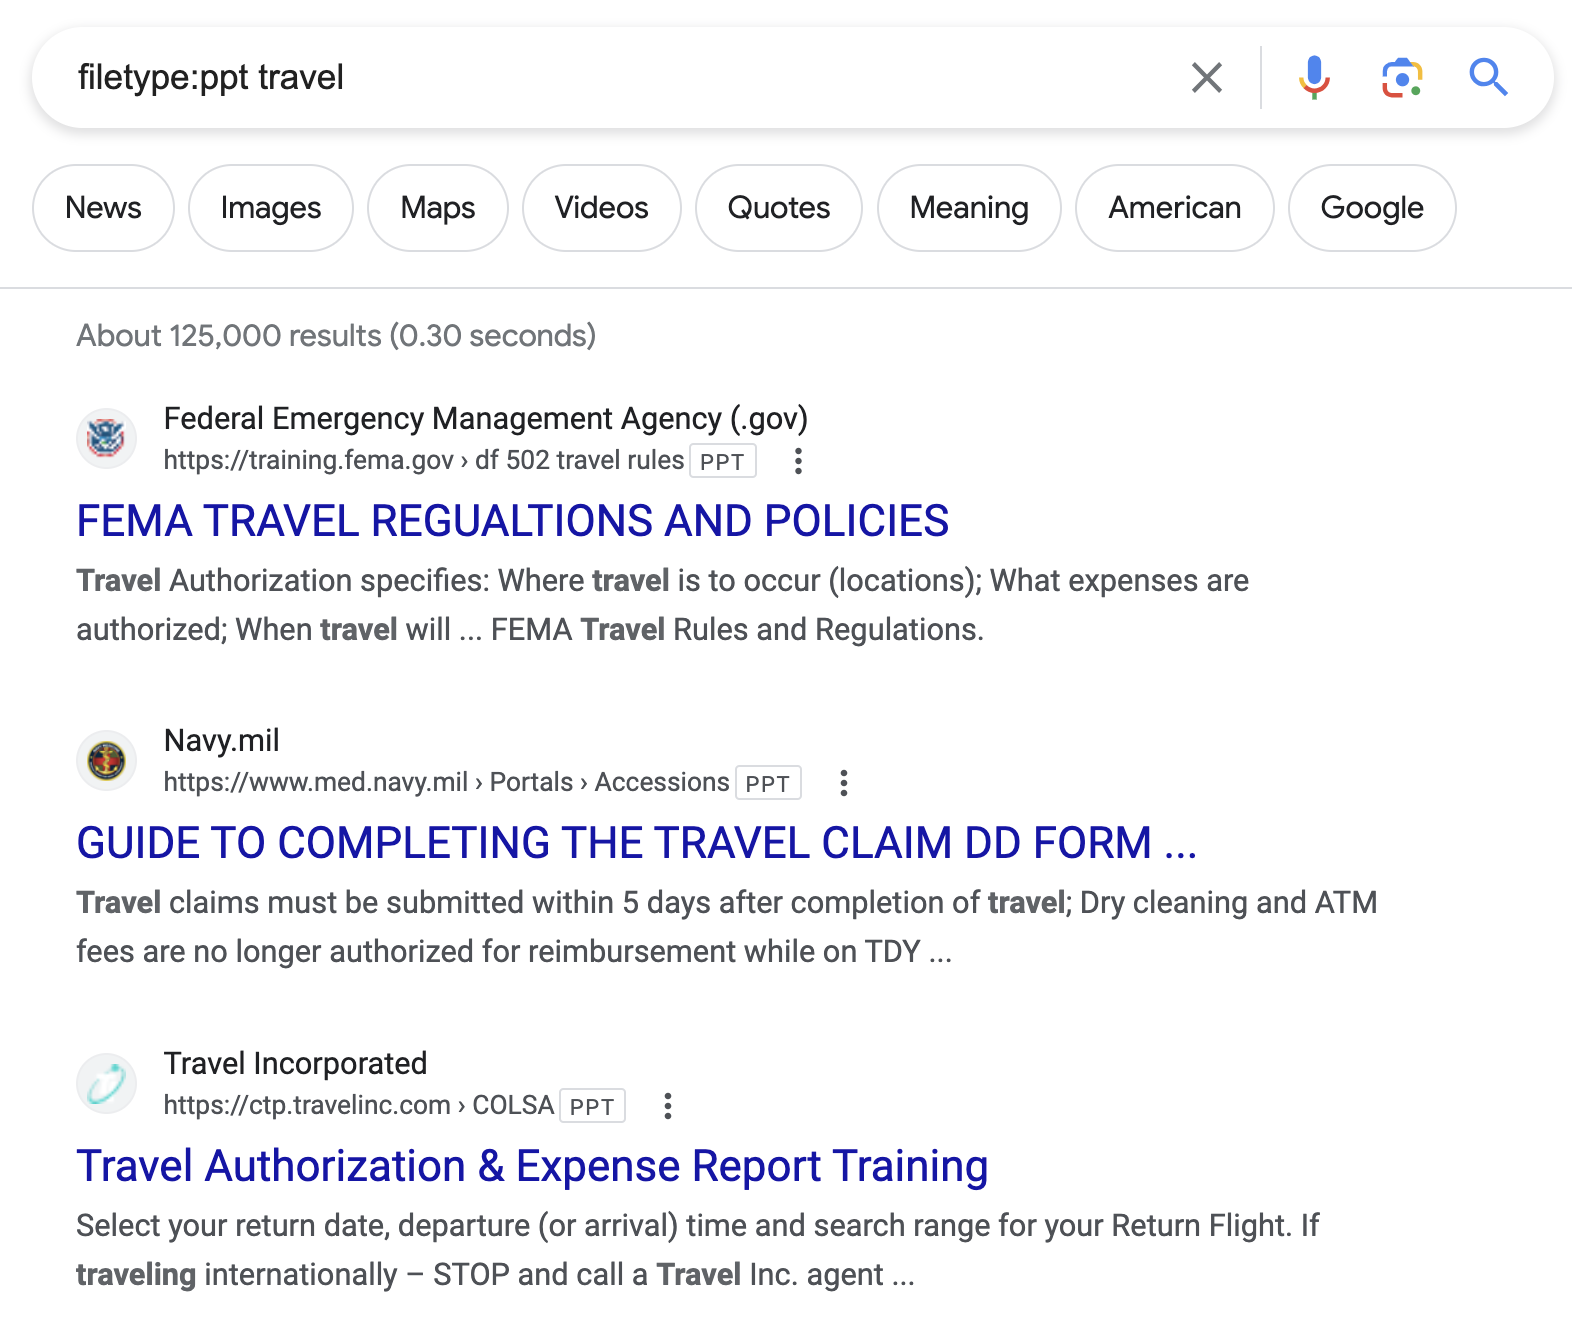 Google search results for “filetype:ppt travel”